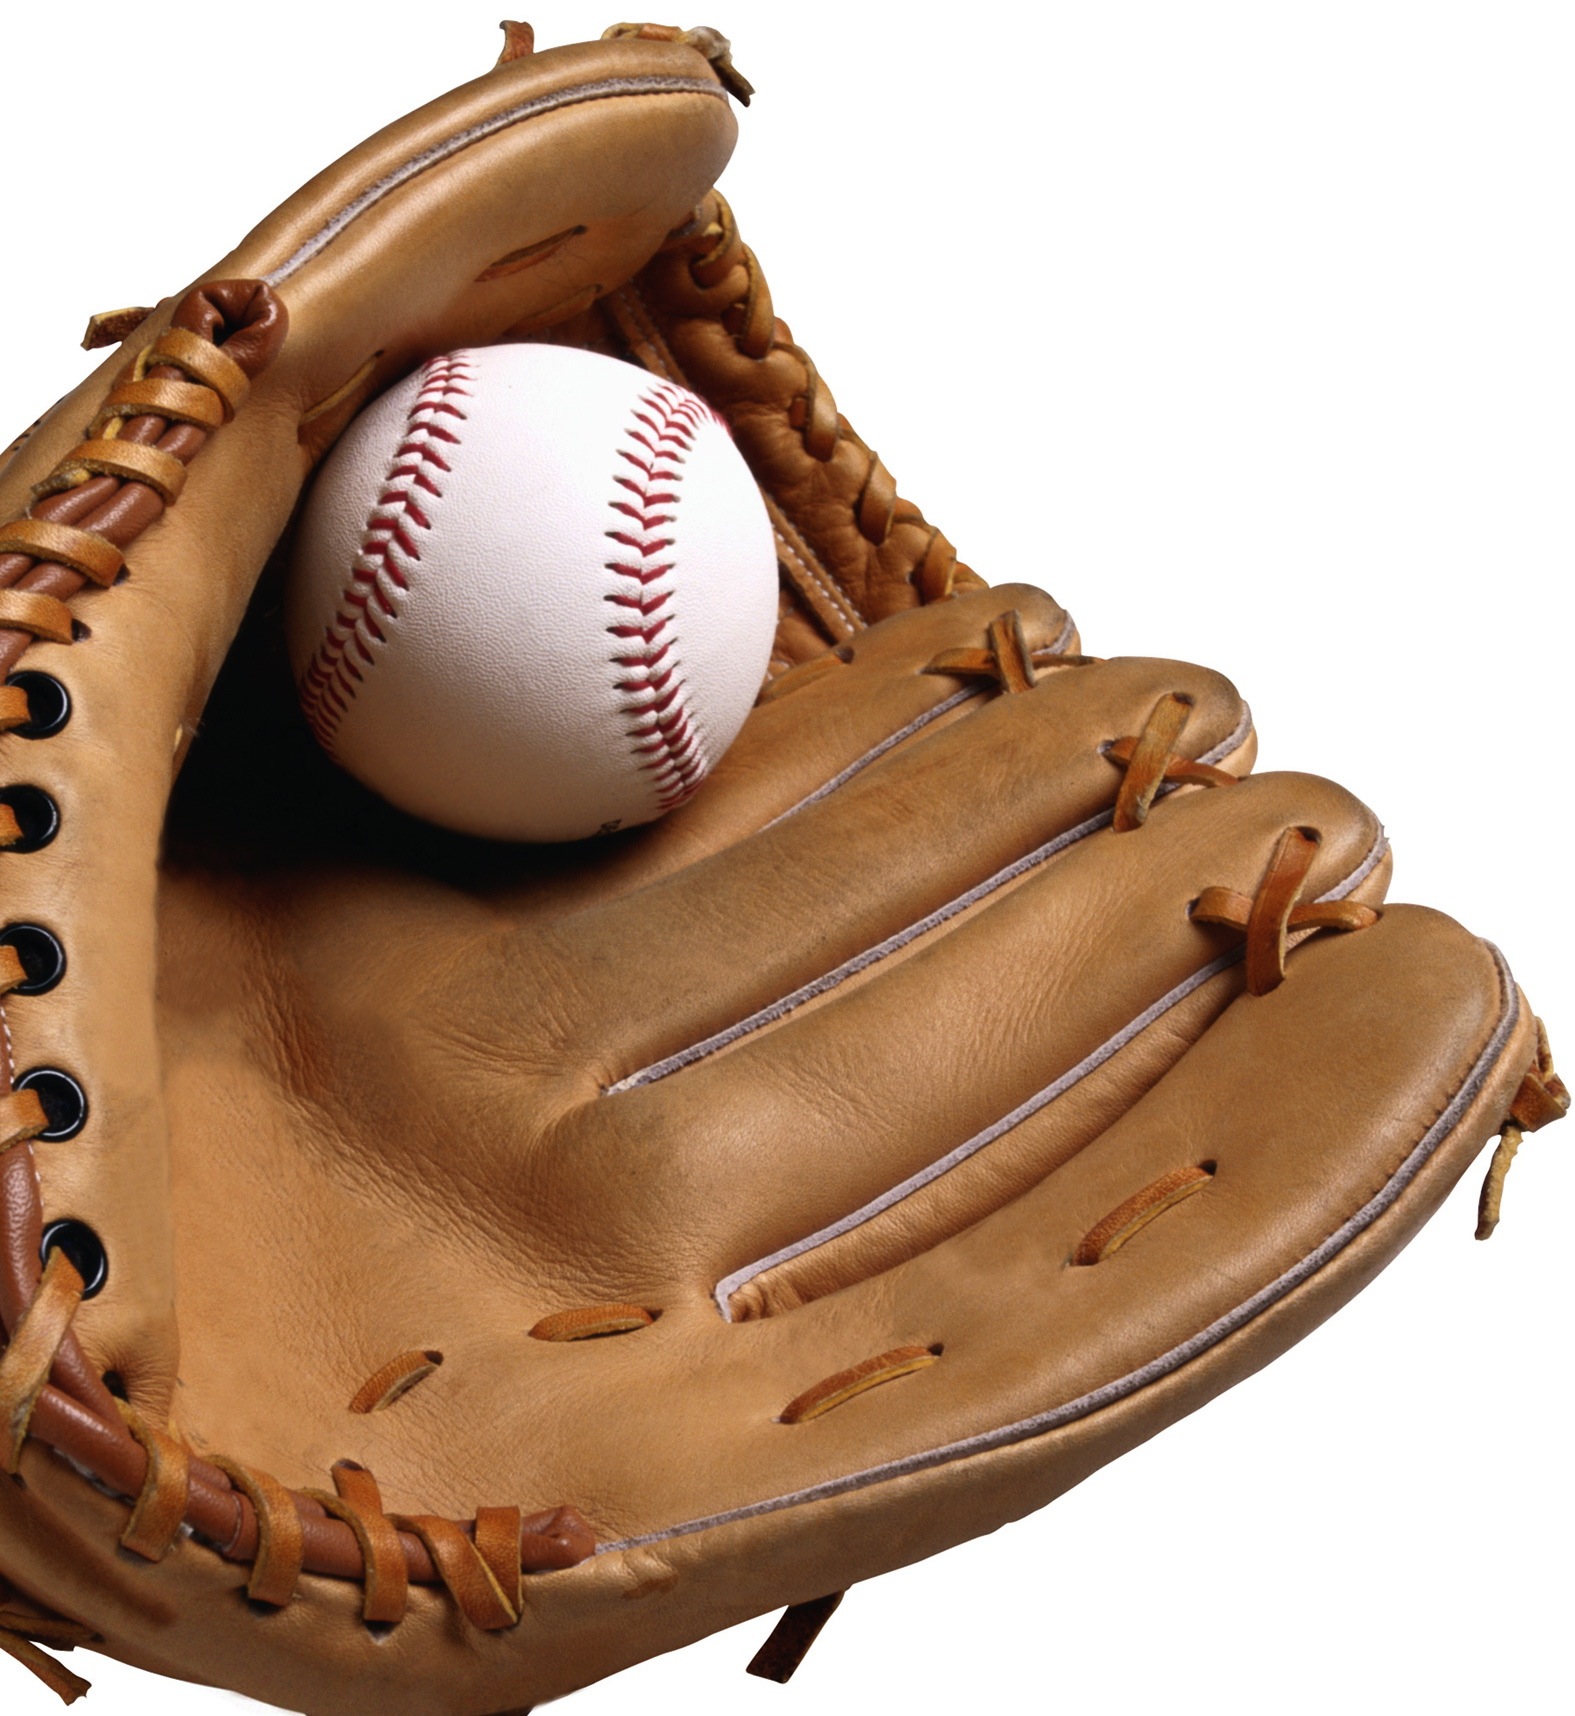 Picture Of Baseball Glove - ClipArt Best